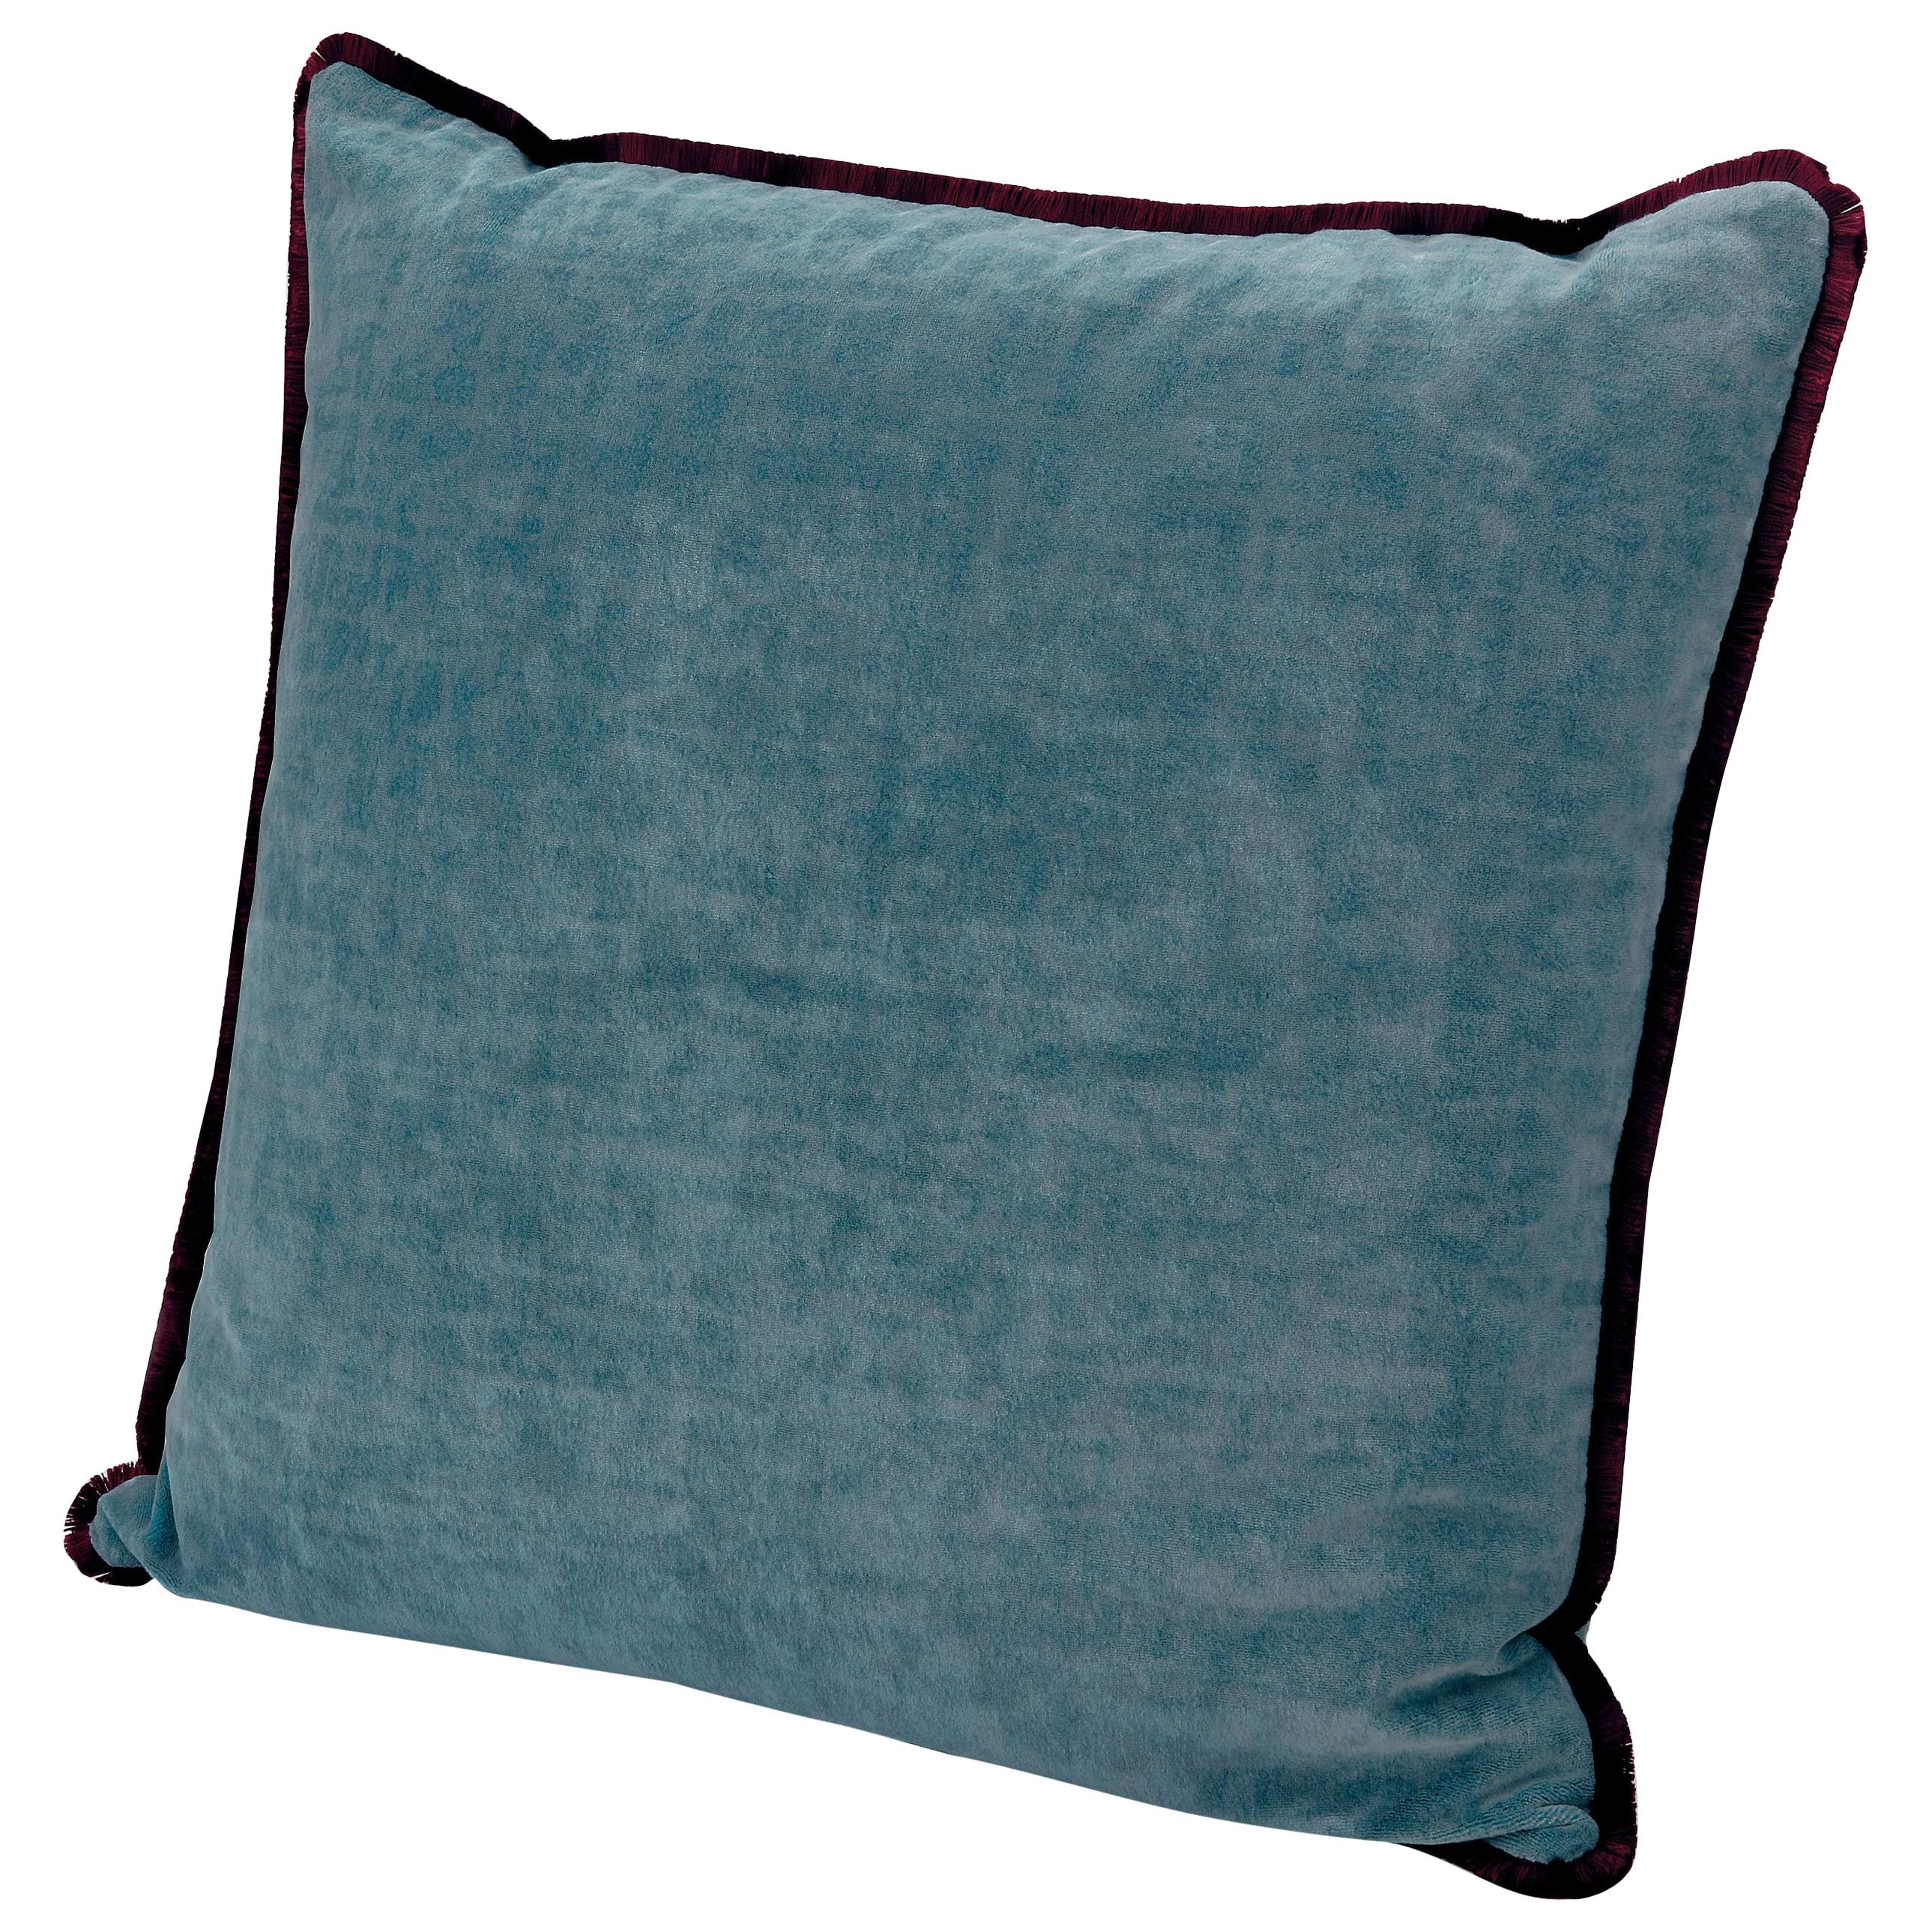 Missoni Home Tibet Cushion in Blue Velvet with Cranberry Border For Sale